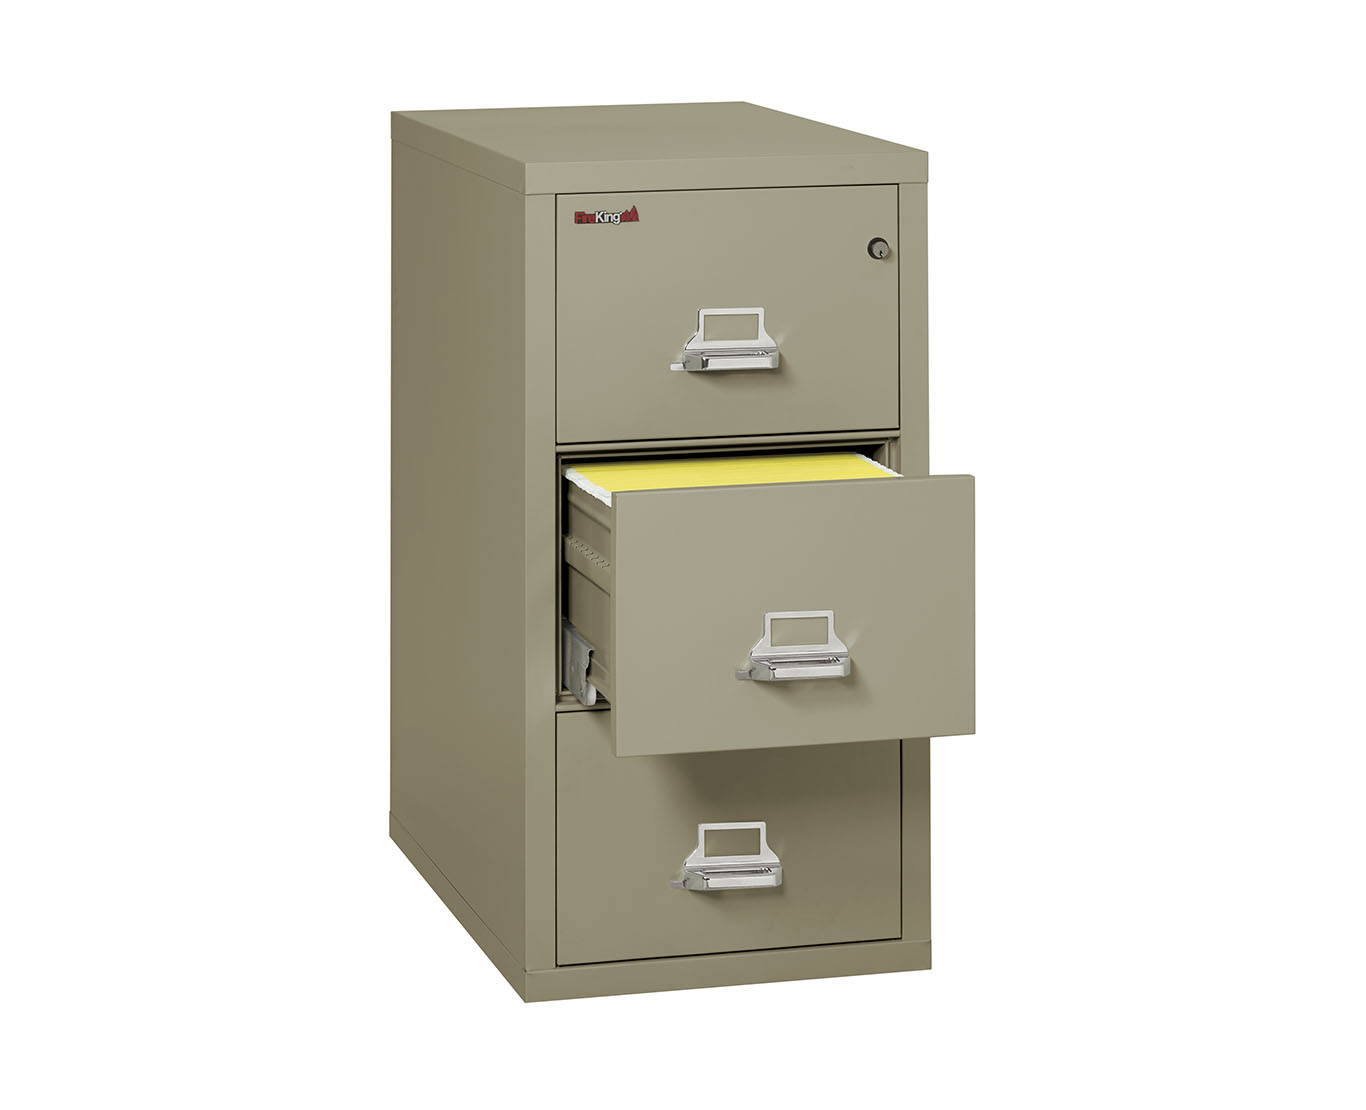 Classic Vertical File Cabinets Fireking Security Group within dimensions 1366 X 1110